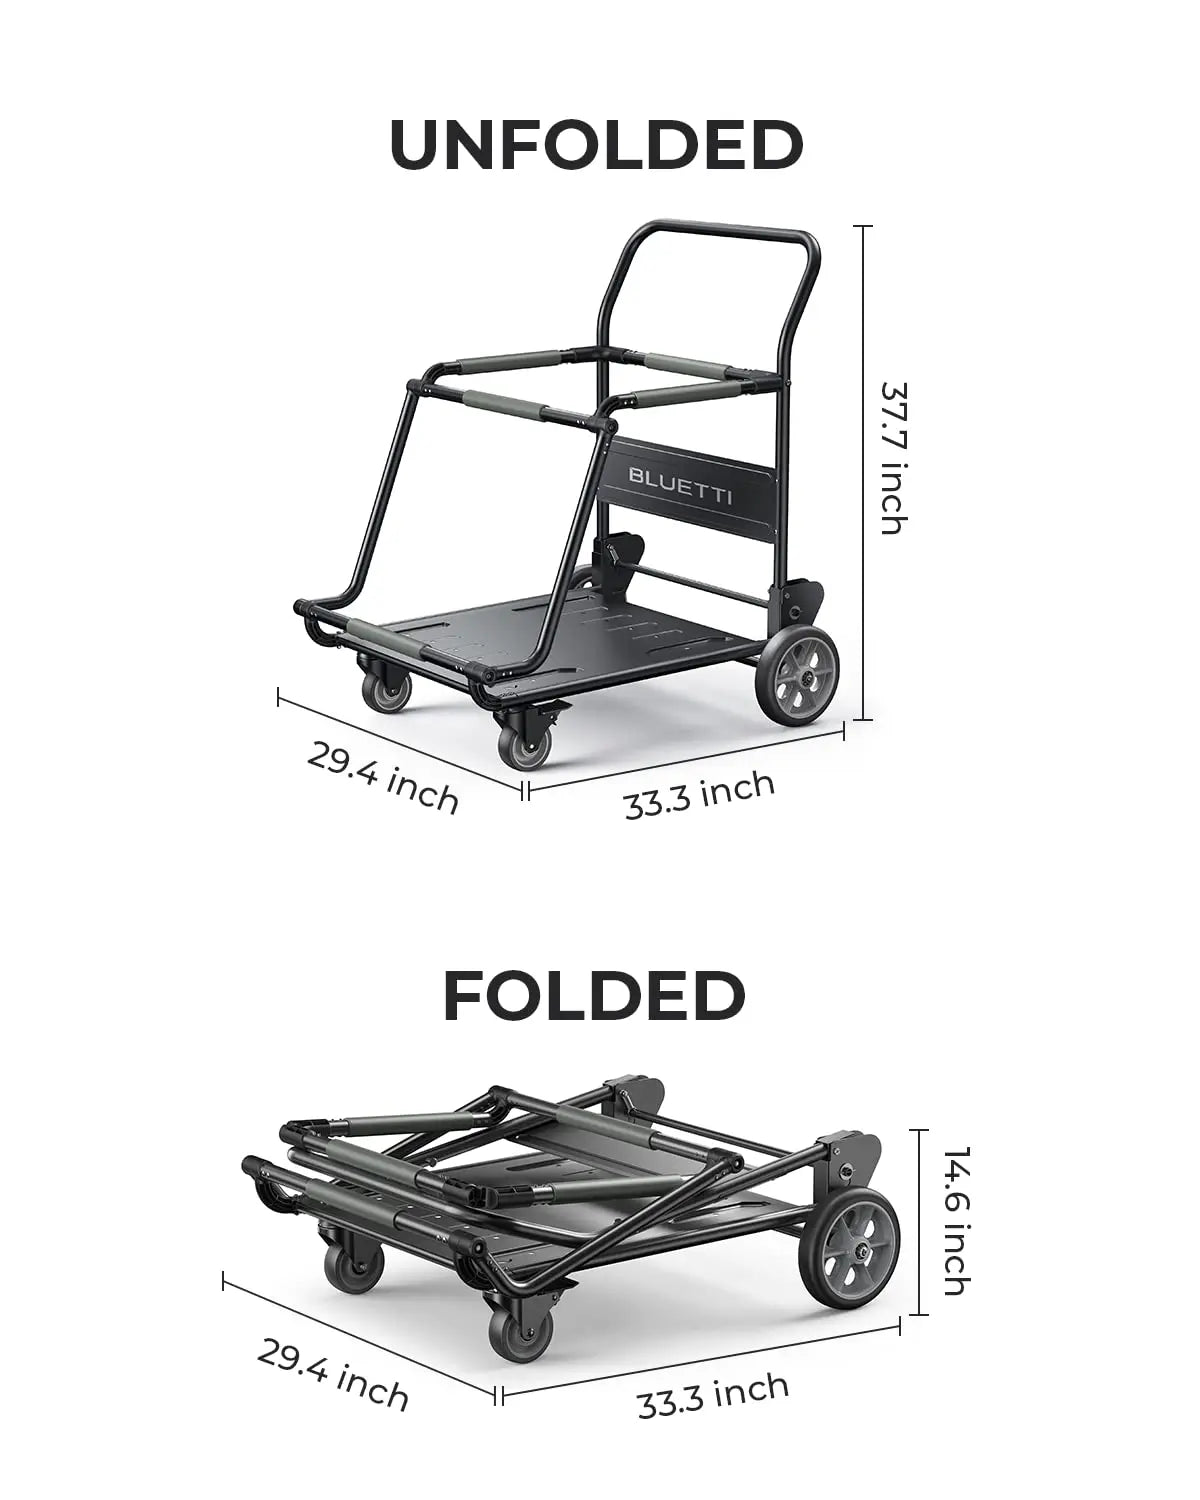 BlUETTI Folding Trolley Design For Transport Your Power Stations Up To 330 Lbs Foldable Trolley Carry Your Furniture Gardening - IHavePaws